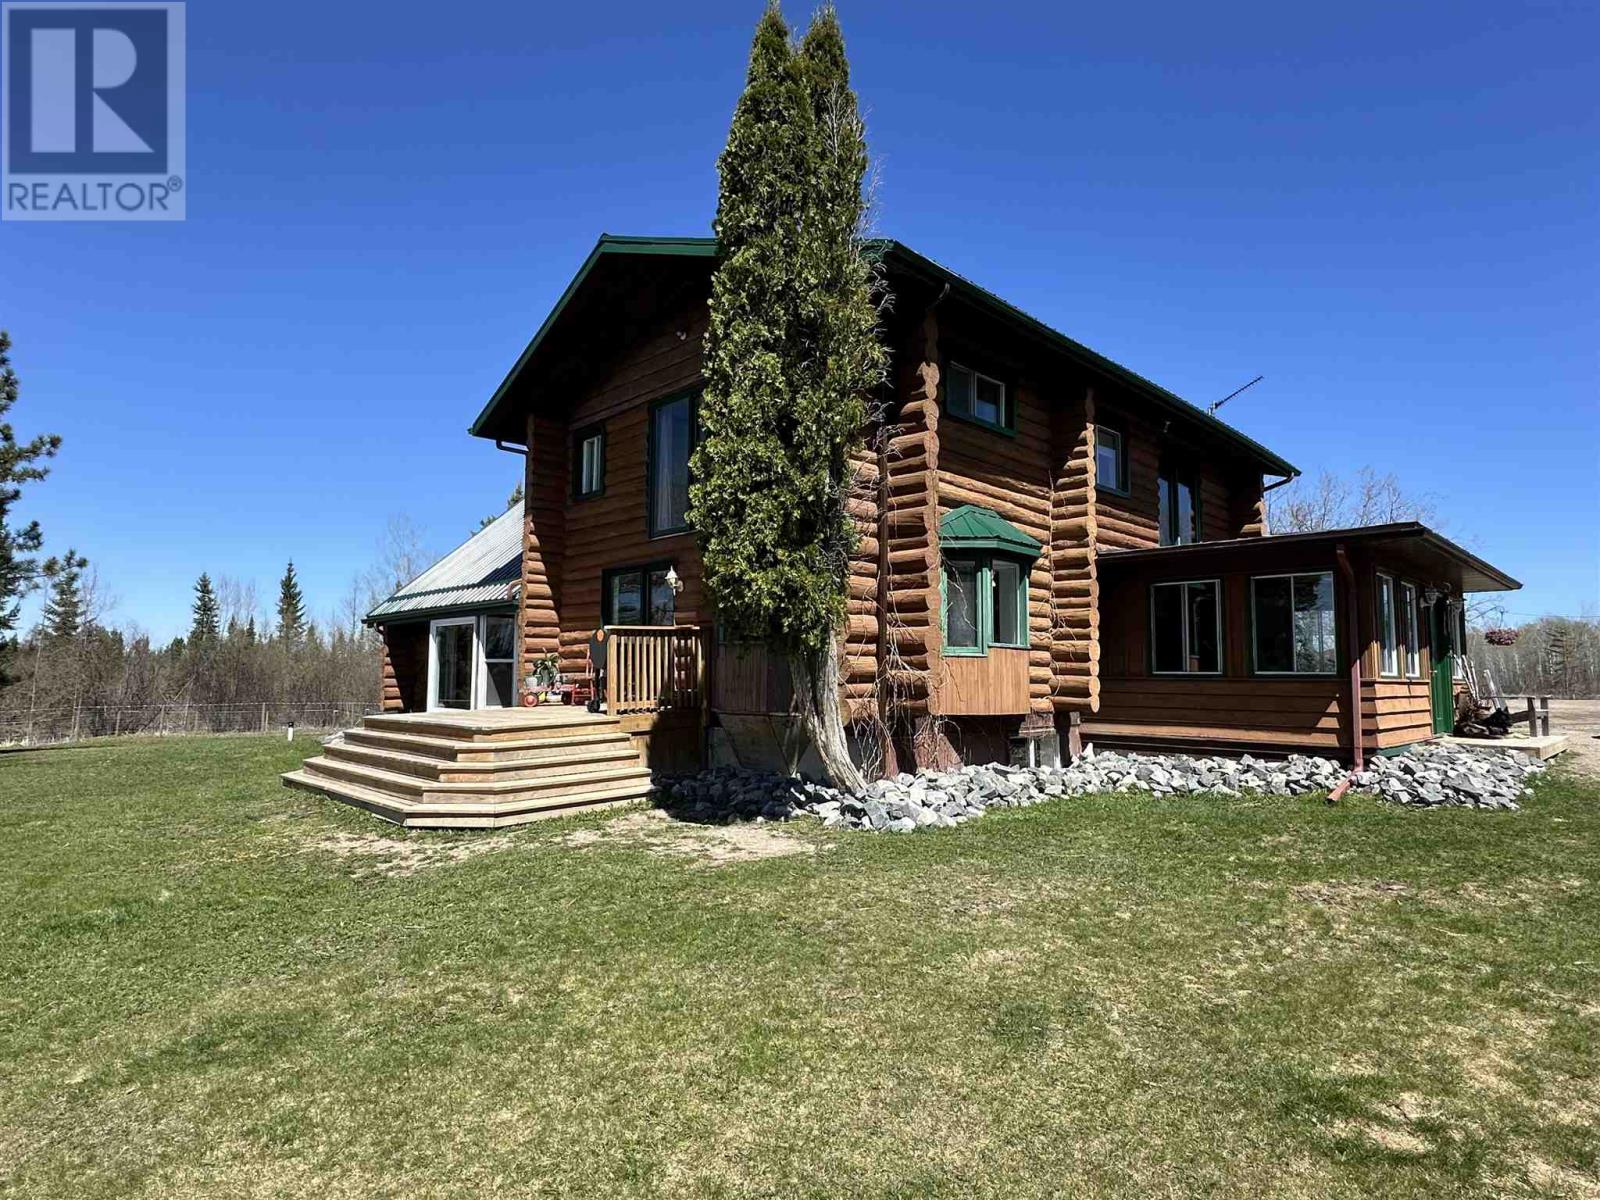 Lot 11 Con 4 HWY 11 N, miscampbell, Ontario